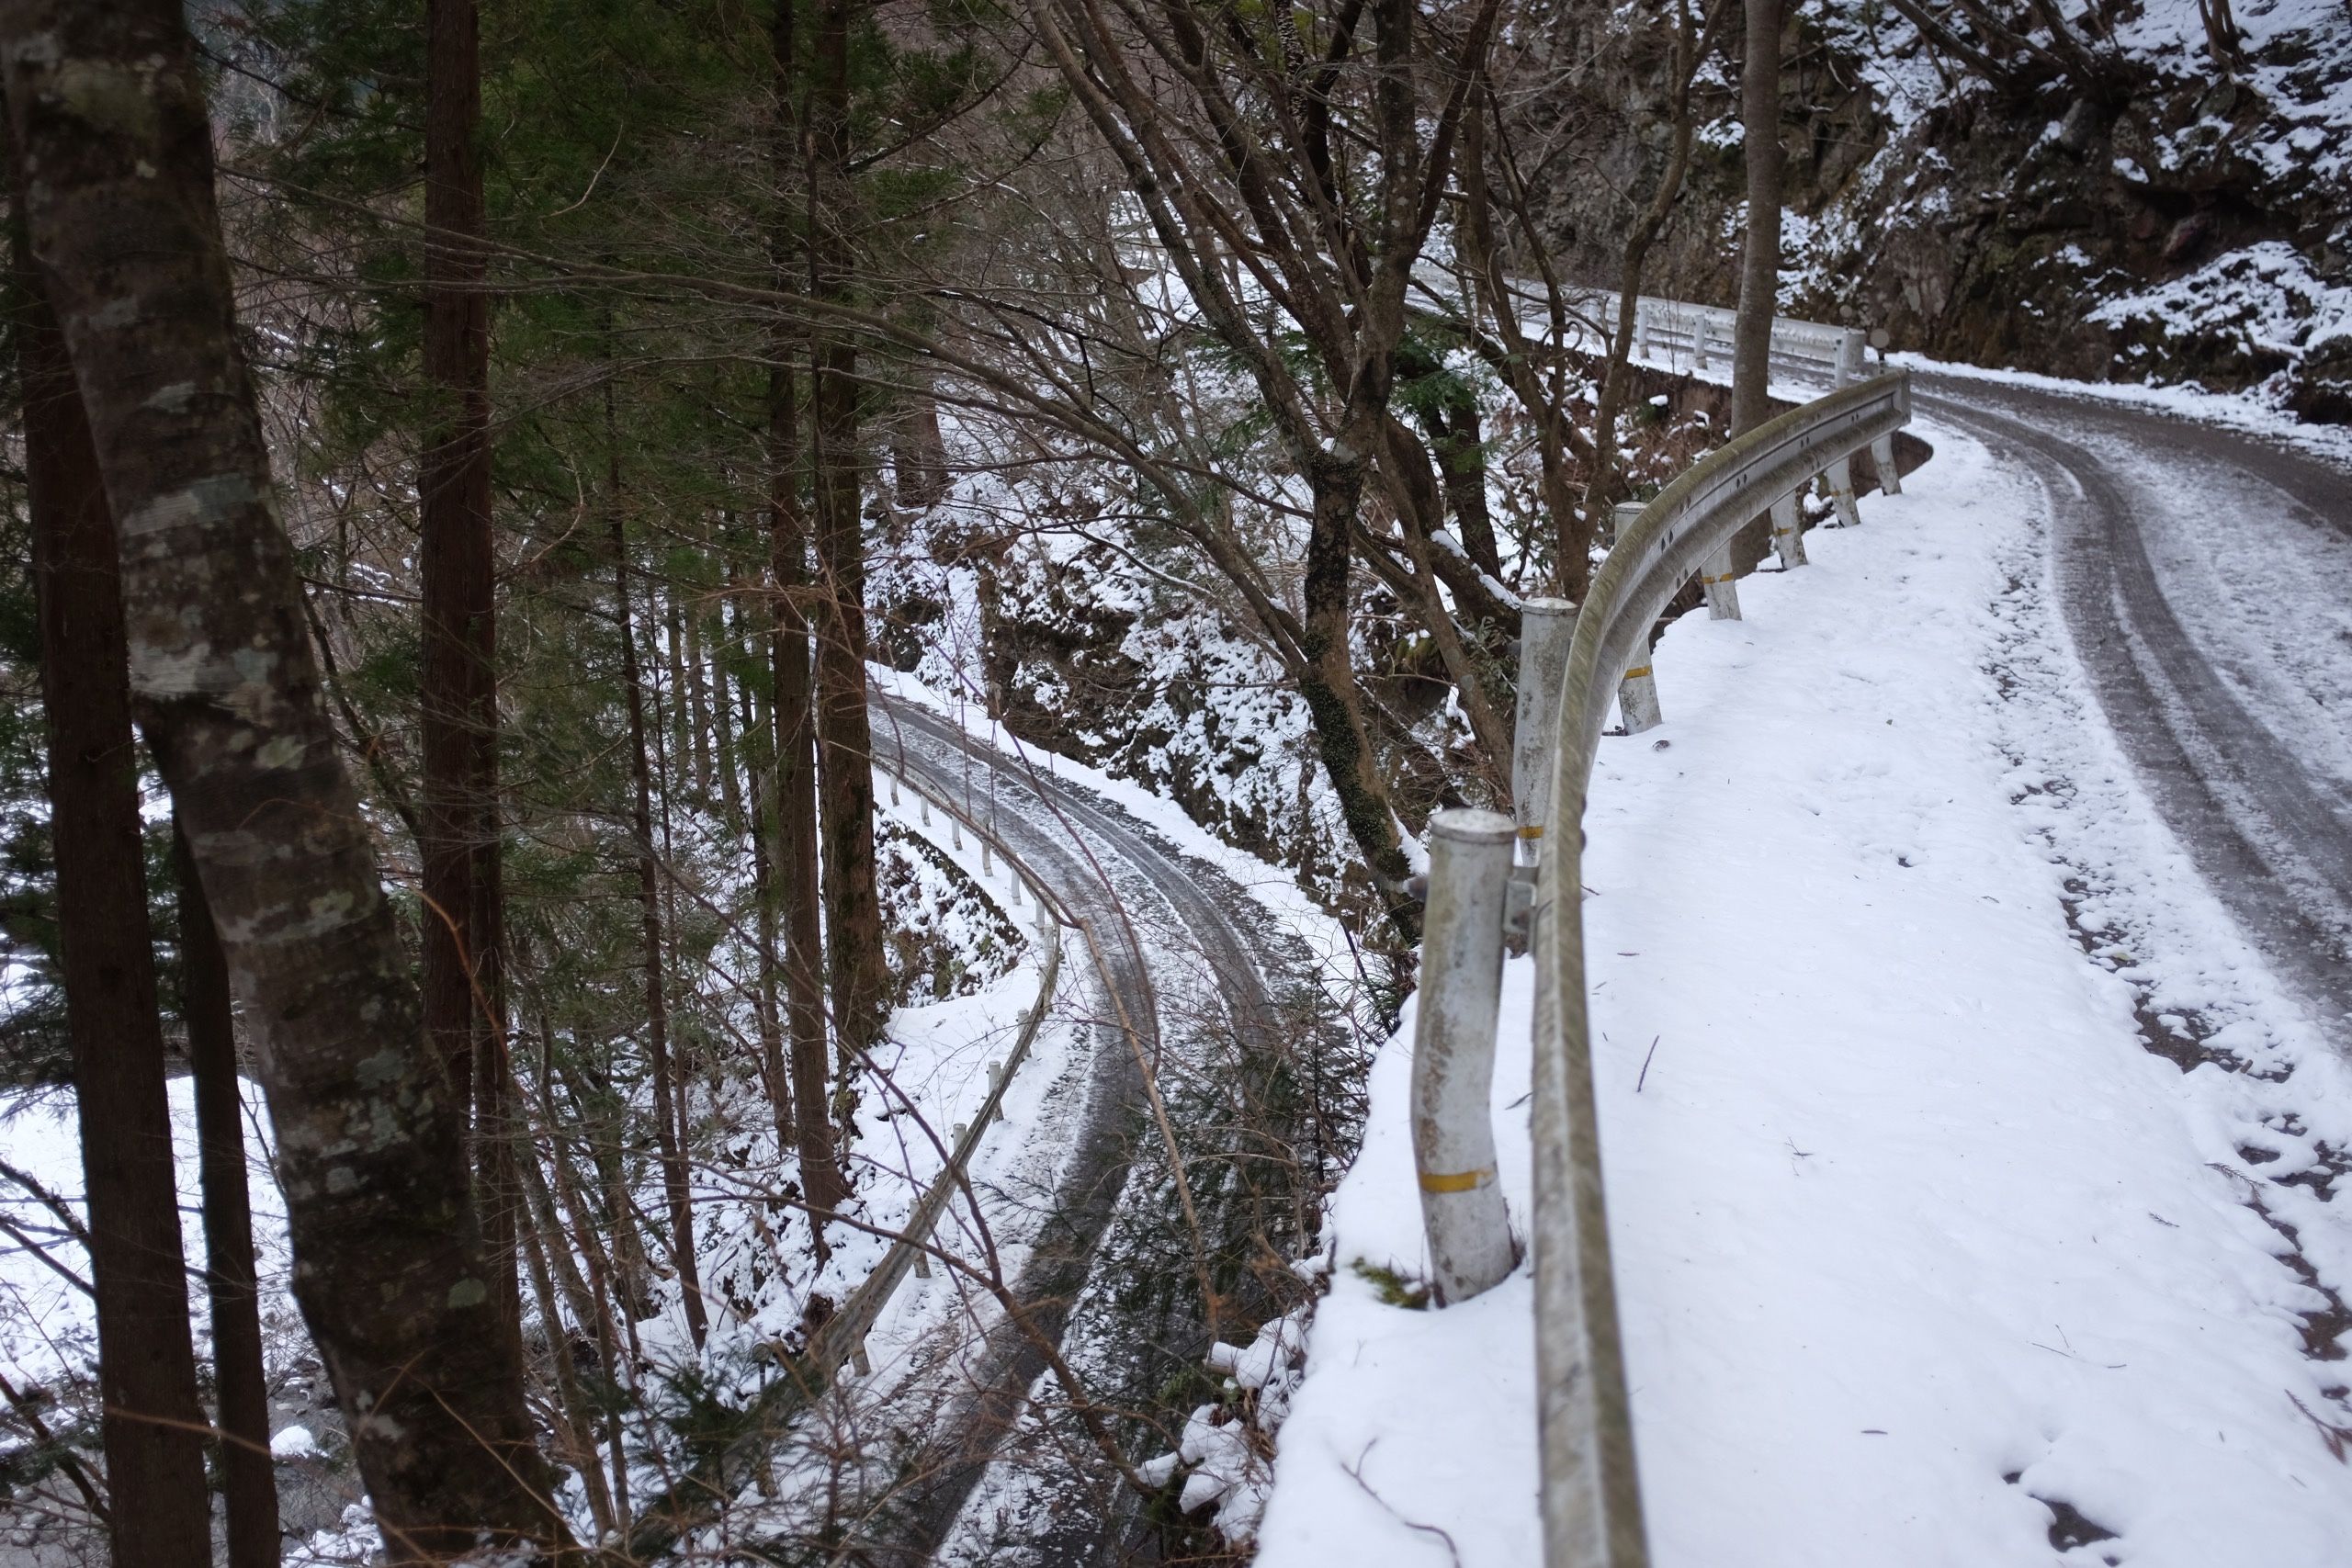 A snow-covered road makes a 180-degree turn.